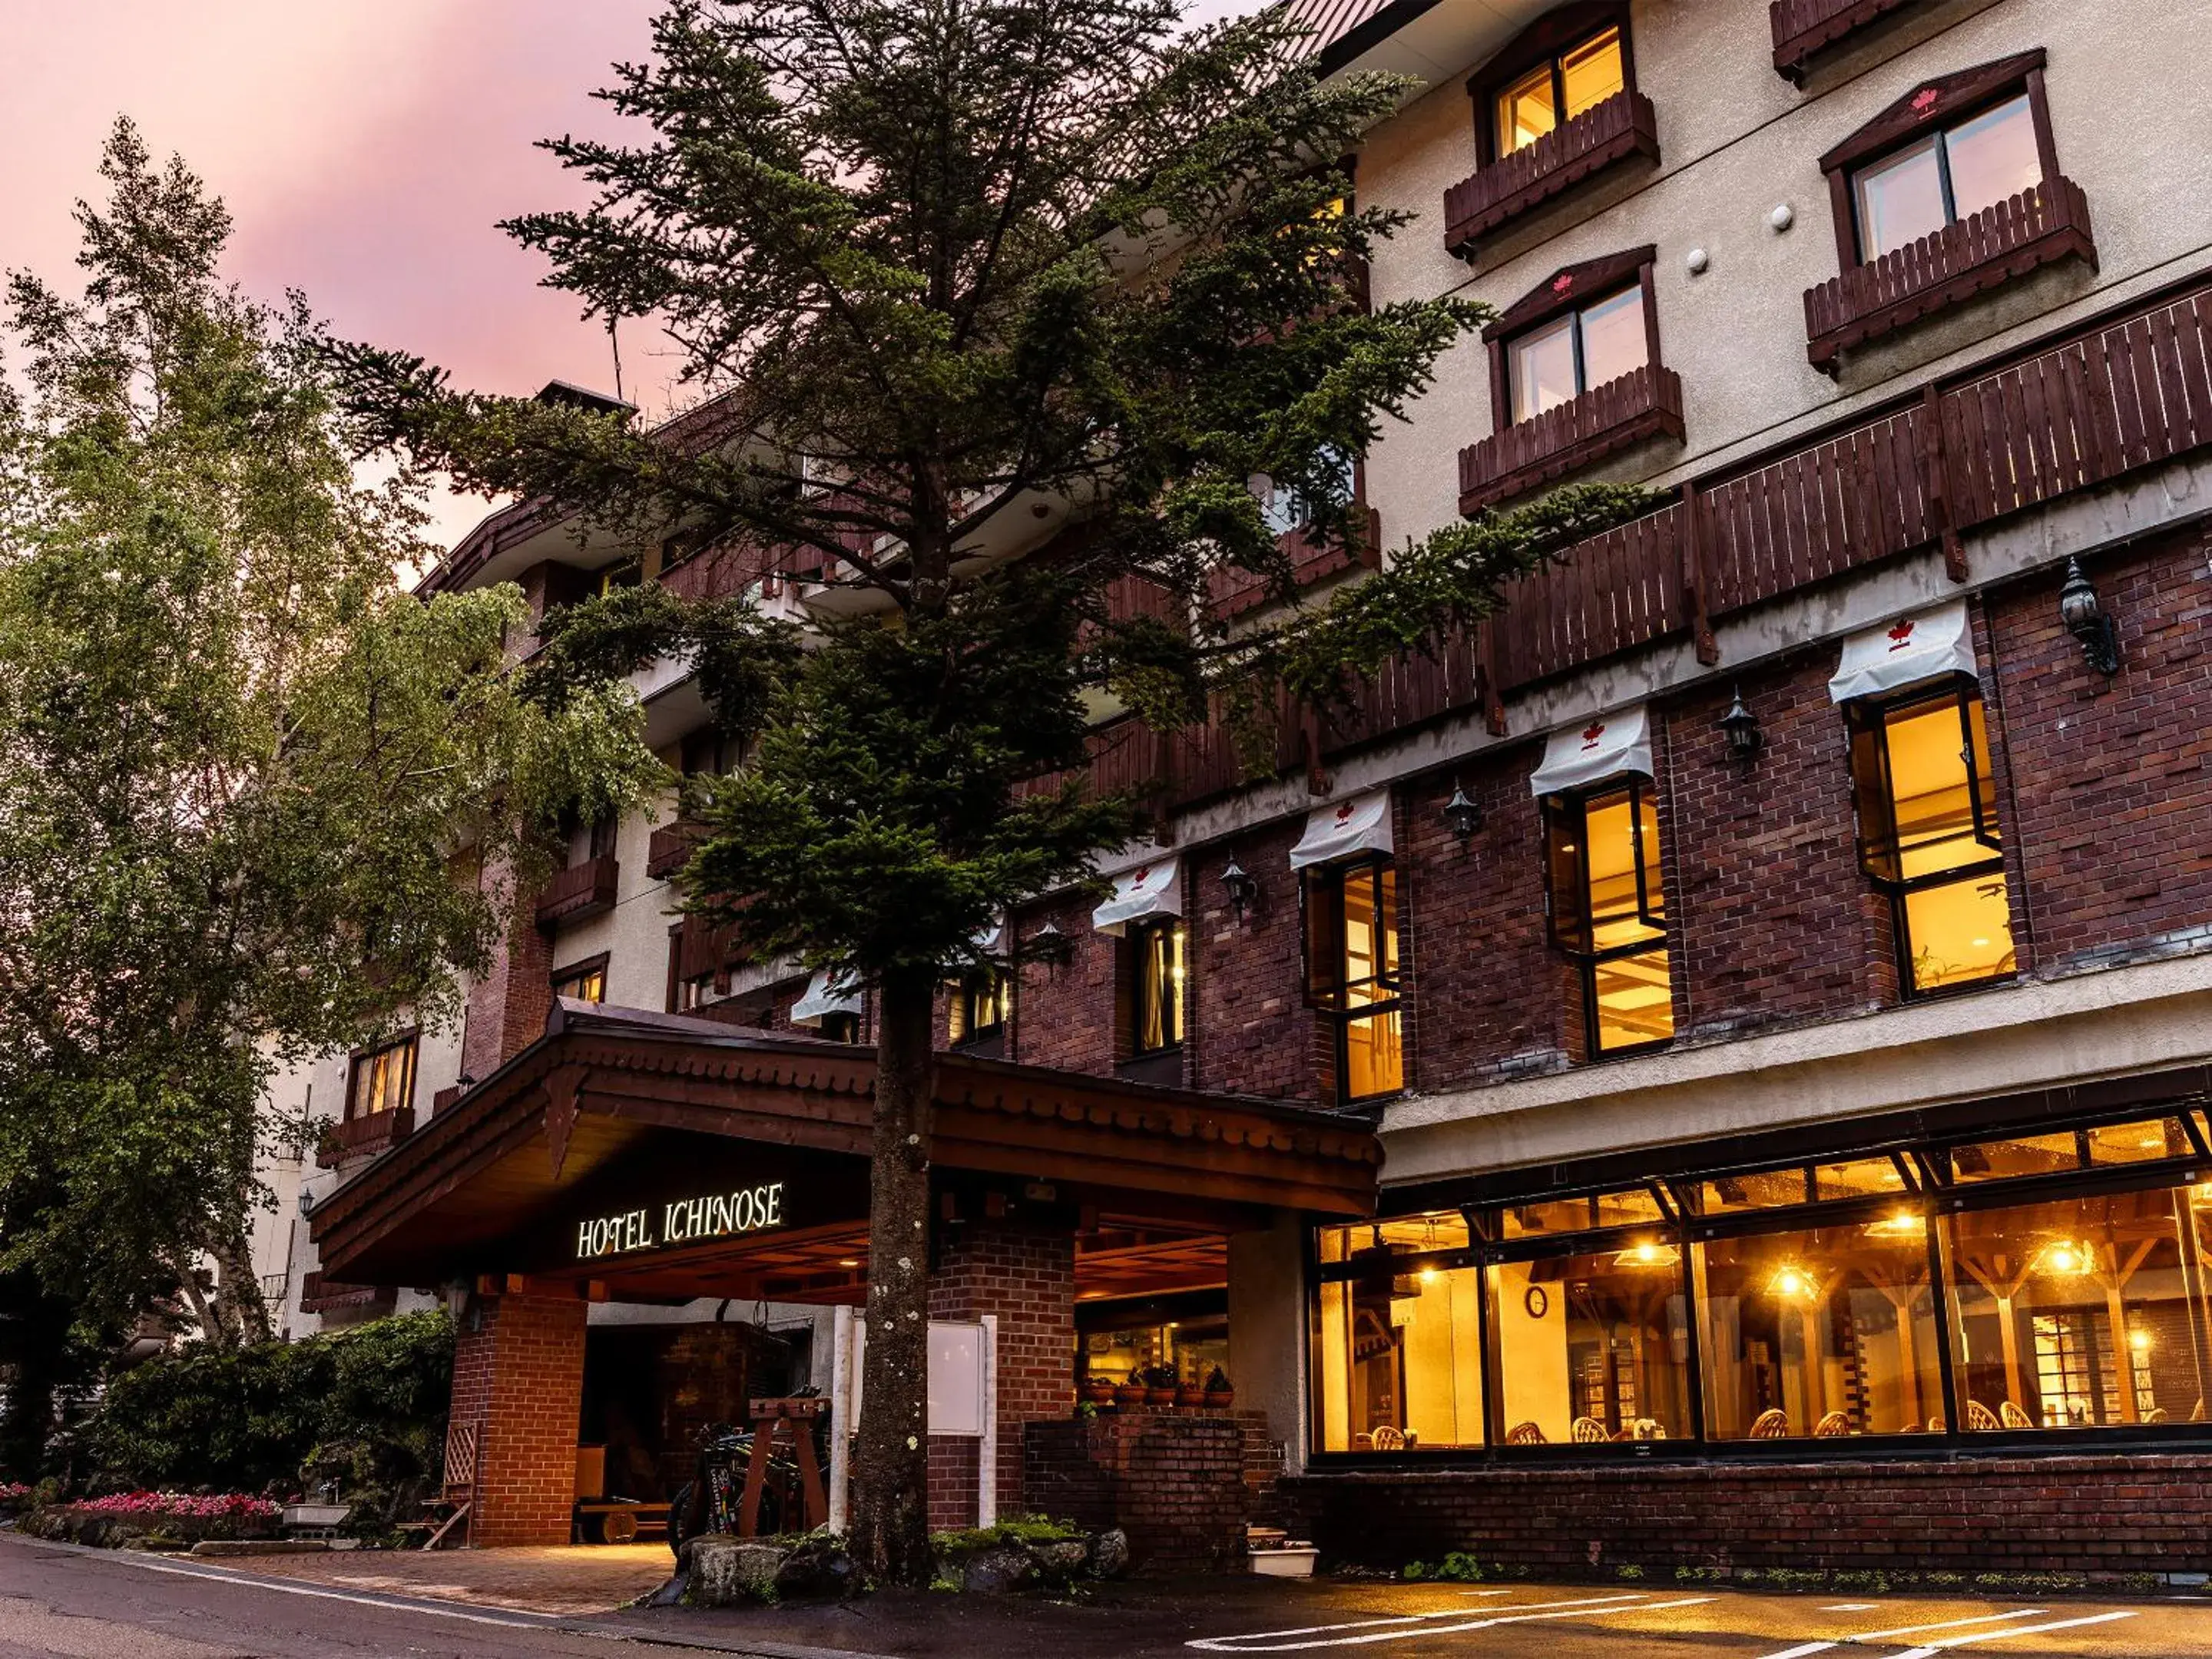 Property Building in Hotel Ichinose